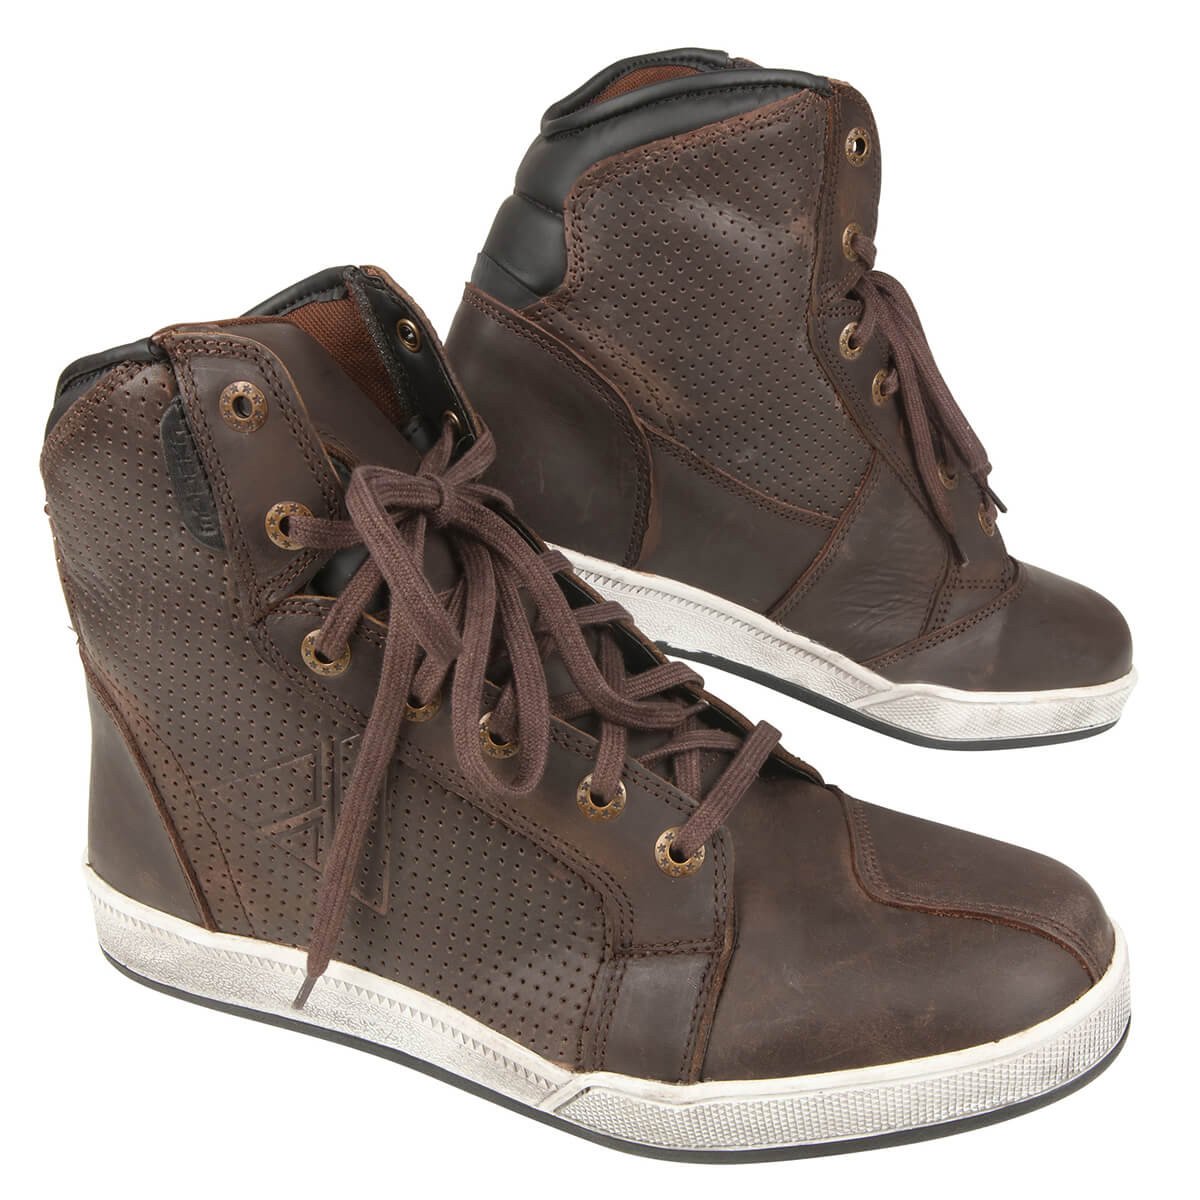 Image of Modeka Midtown Sneakers Brown Size 46 ID 4045765137994